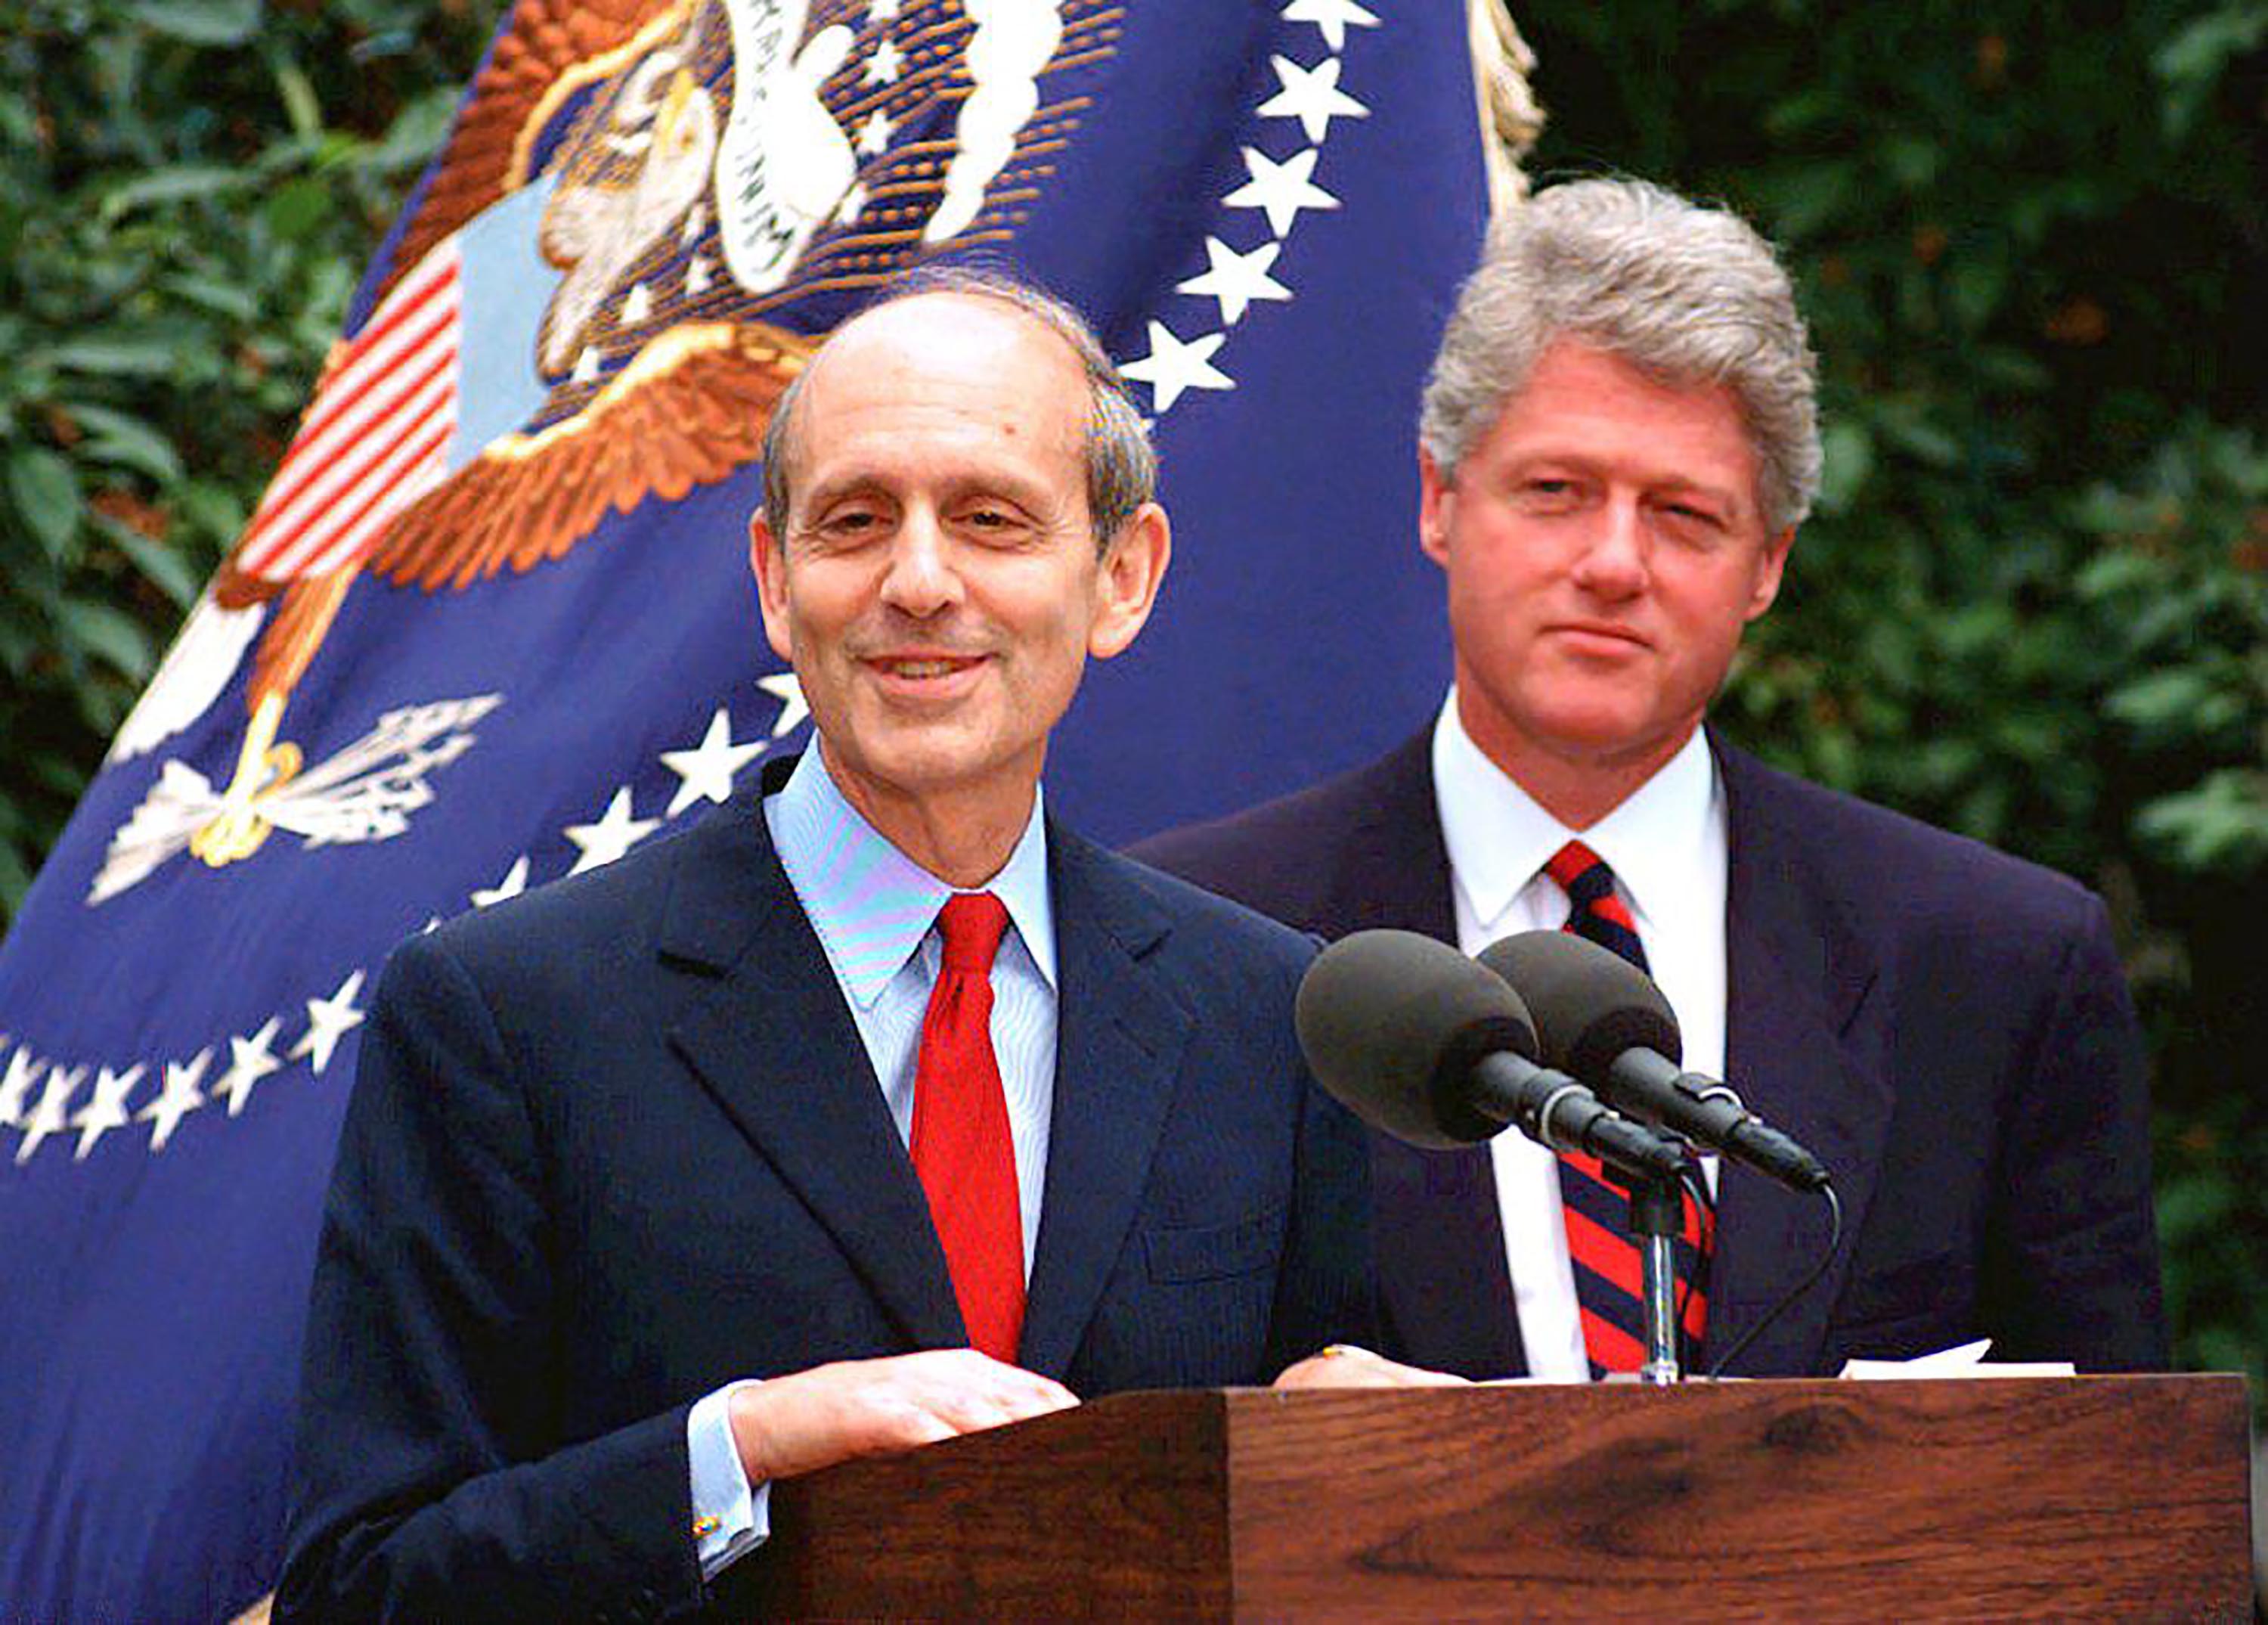 Then-Supreme Court nominee Judge Stephen Breyer speaks with reporters in May 1994 in the White House Rose Garden as US President Bill Clinton listens